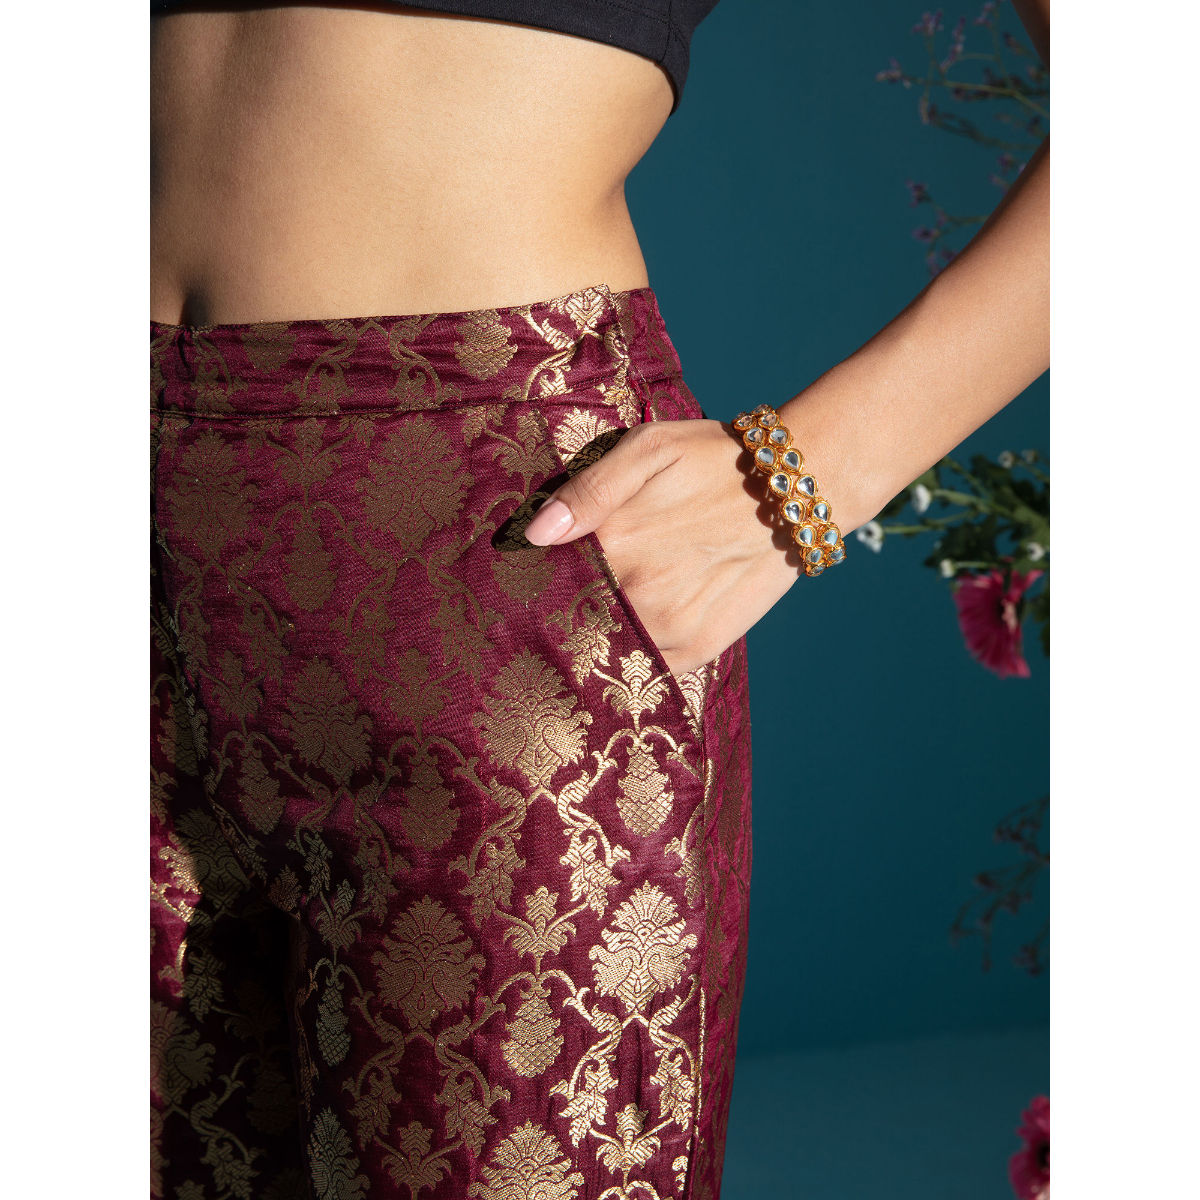 Buy Vasavi Women Brown Slim fit Cigarette pants Online at Low Prices in  India - Paytmmall.com